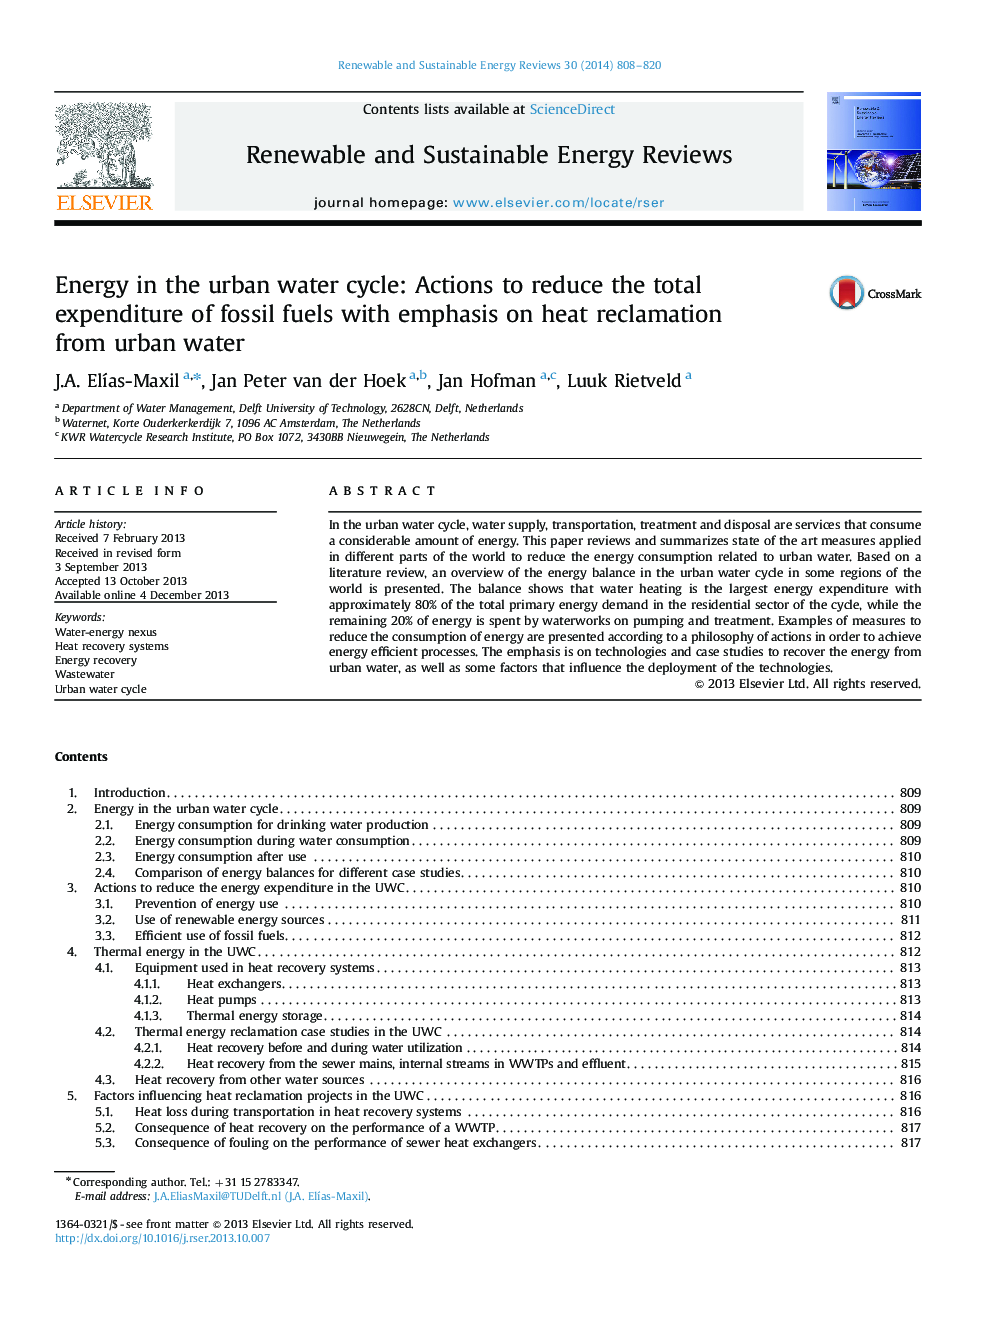 Energy in the urban water cycle: Actions to reduce the total expenditure of fossil fuels with emphasis on heat reclamation from urban water